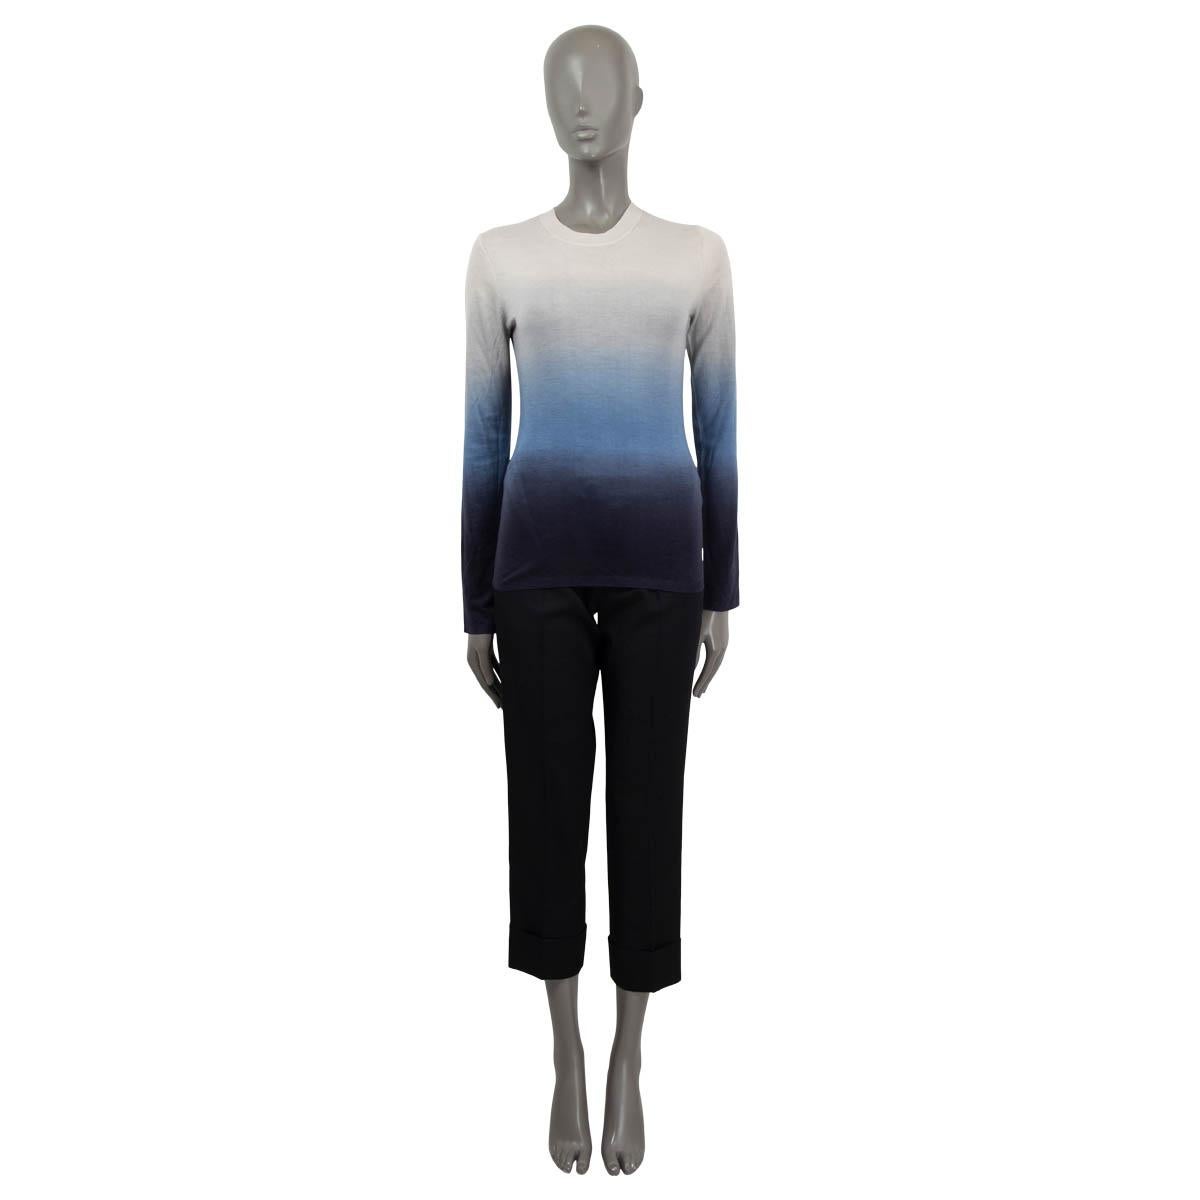 100% authentic Gabriela Hearst 'Miller' tie-dyed sweater in beige, blue and navy cashmere (100%). Features long sleeves and a crewneck. Unlined. Has been worn once and is in virtually new condition.

Measurements
Tag Size	S
Size	S
Shoulder